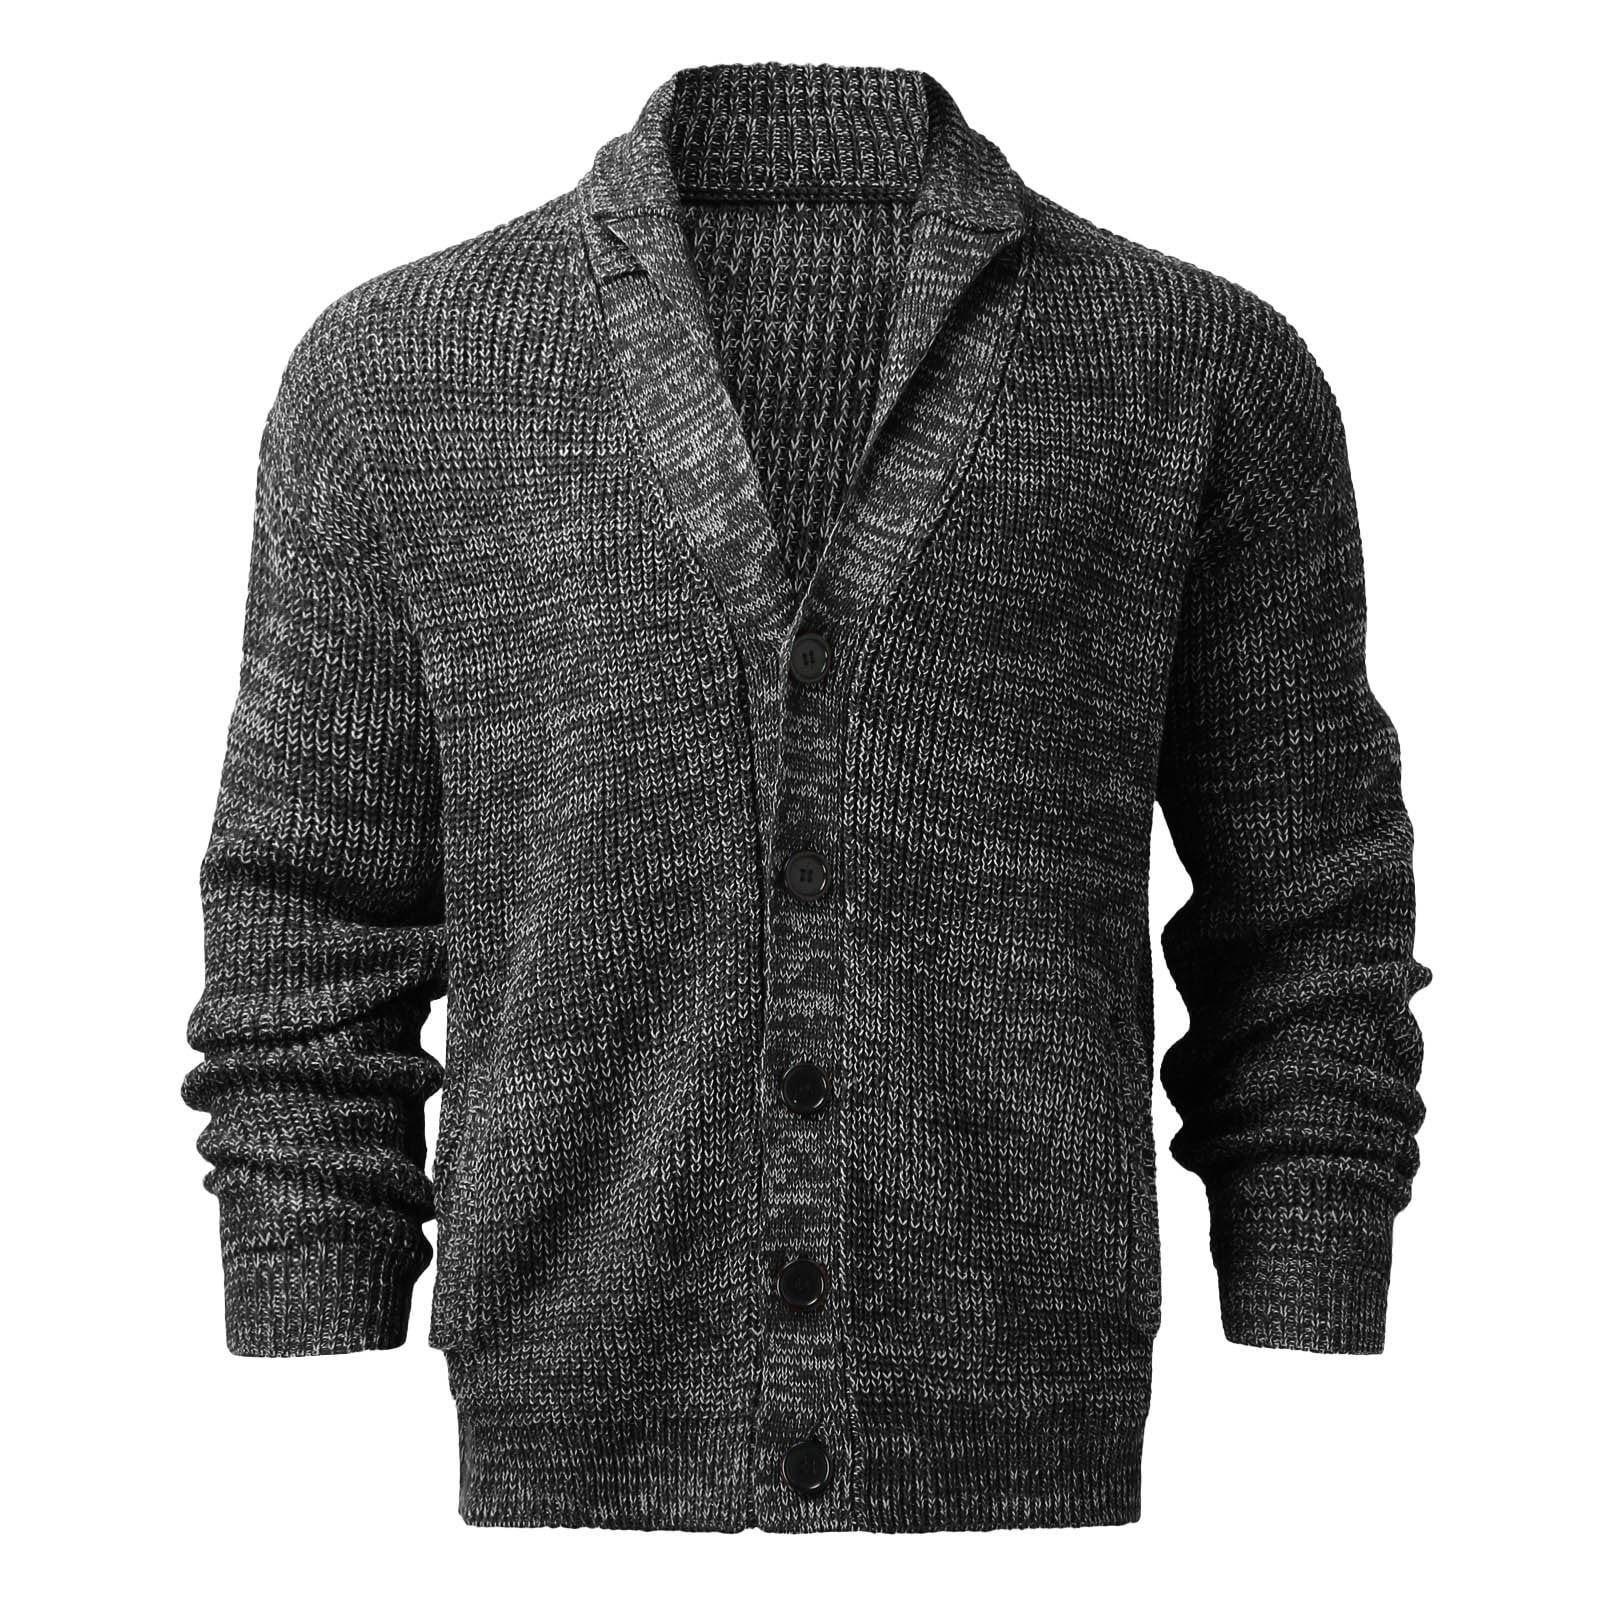 Gafeng Mens Shawl Collar Cardigan Sweater Cable Knit Button Chunky Long Sleeve Winter Fisherman Casual Cardigans